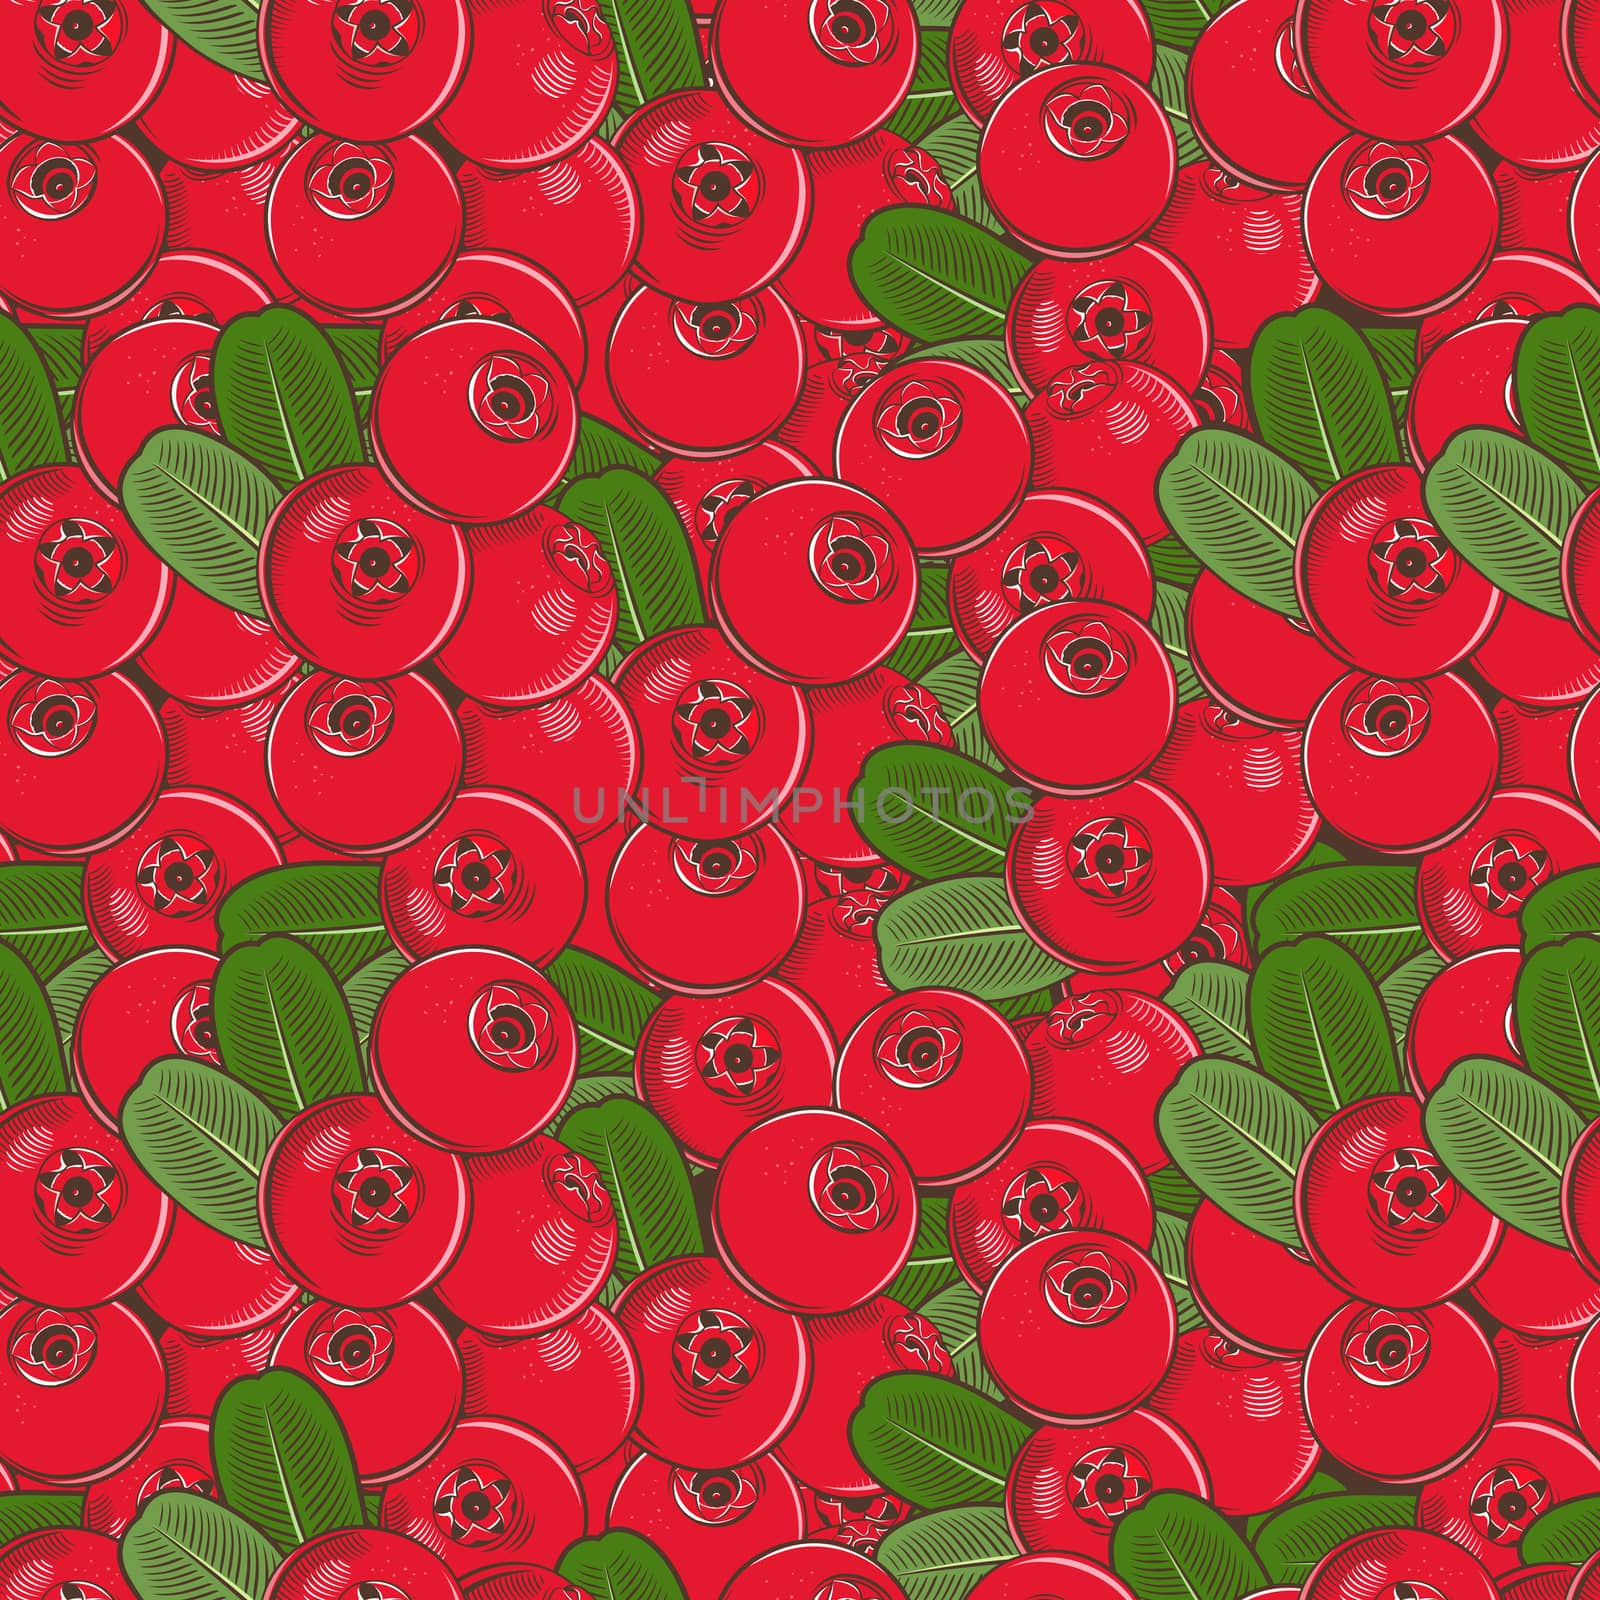 Vintage Cowberry Seamless Pattern by ConceptCafe